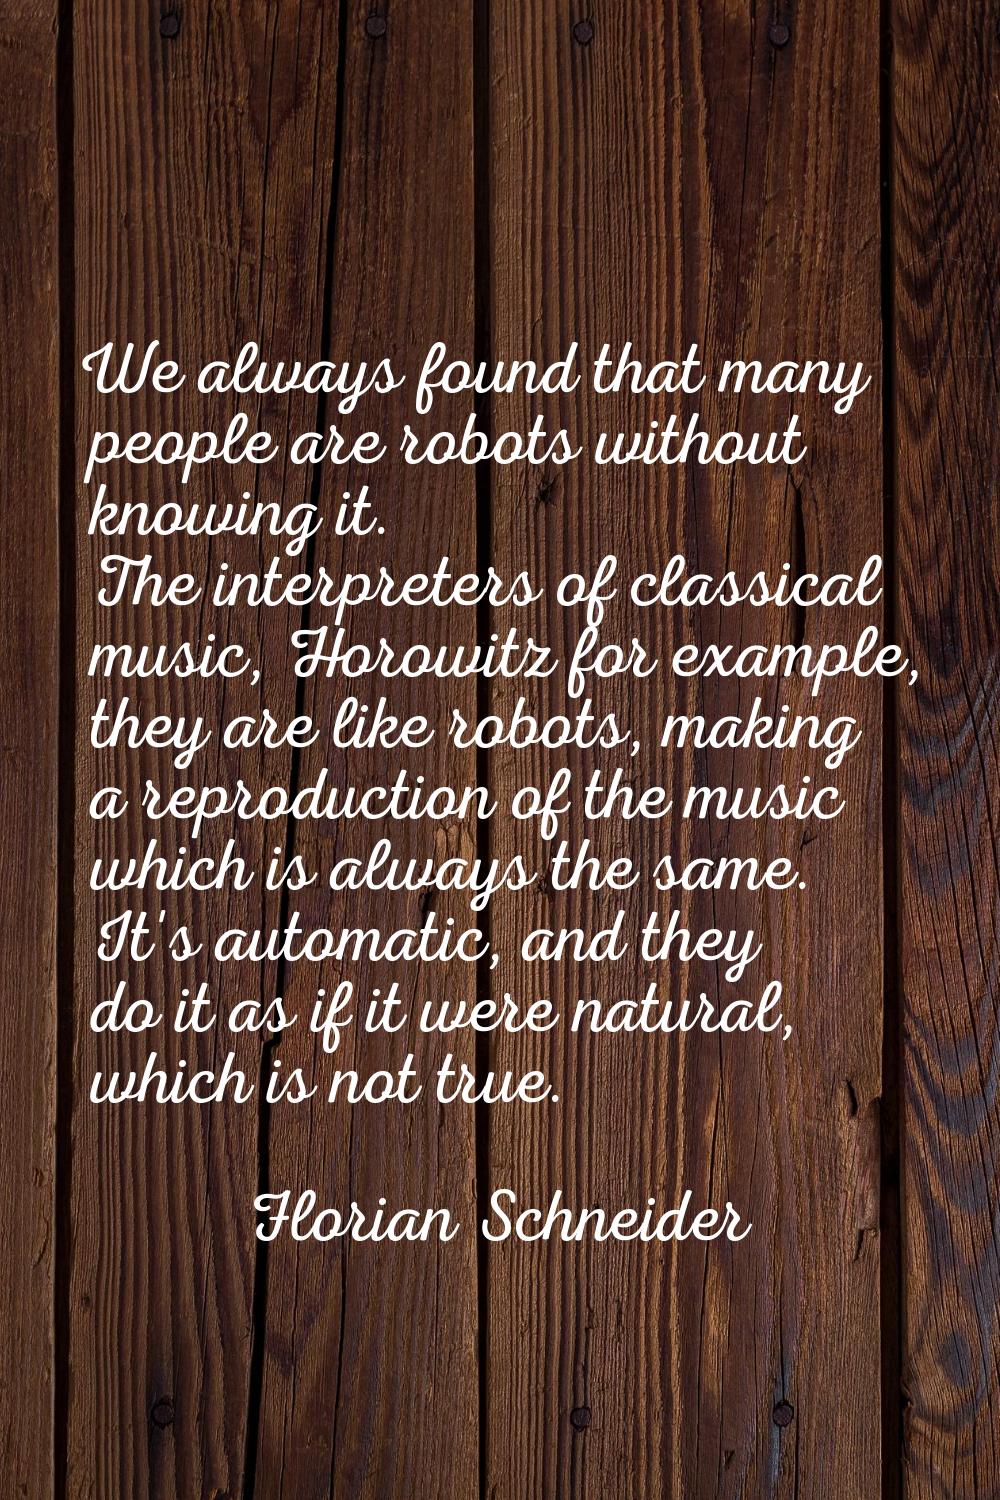 We always found that many people are robots without knowing it. The interpreters of classical music